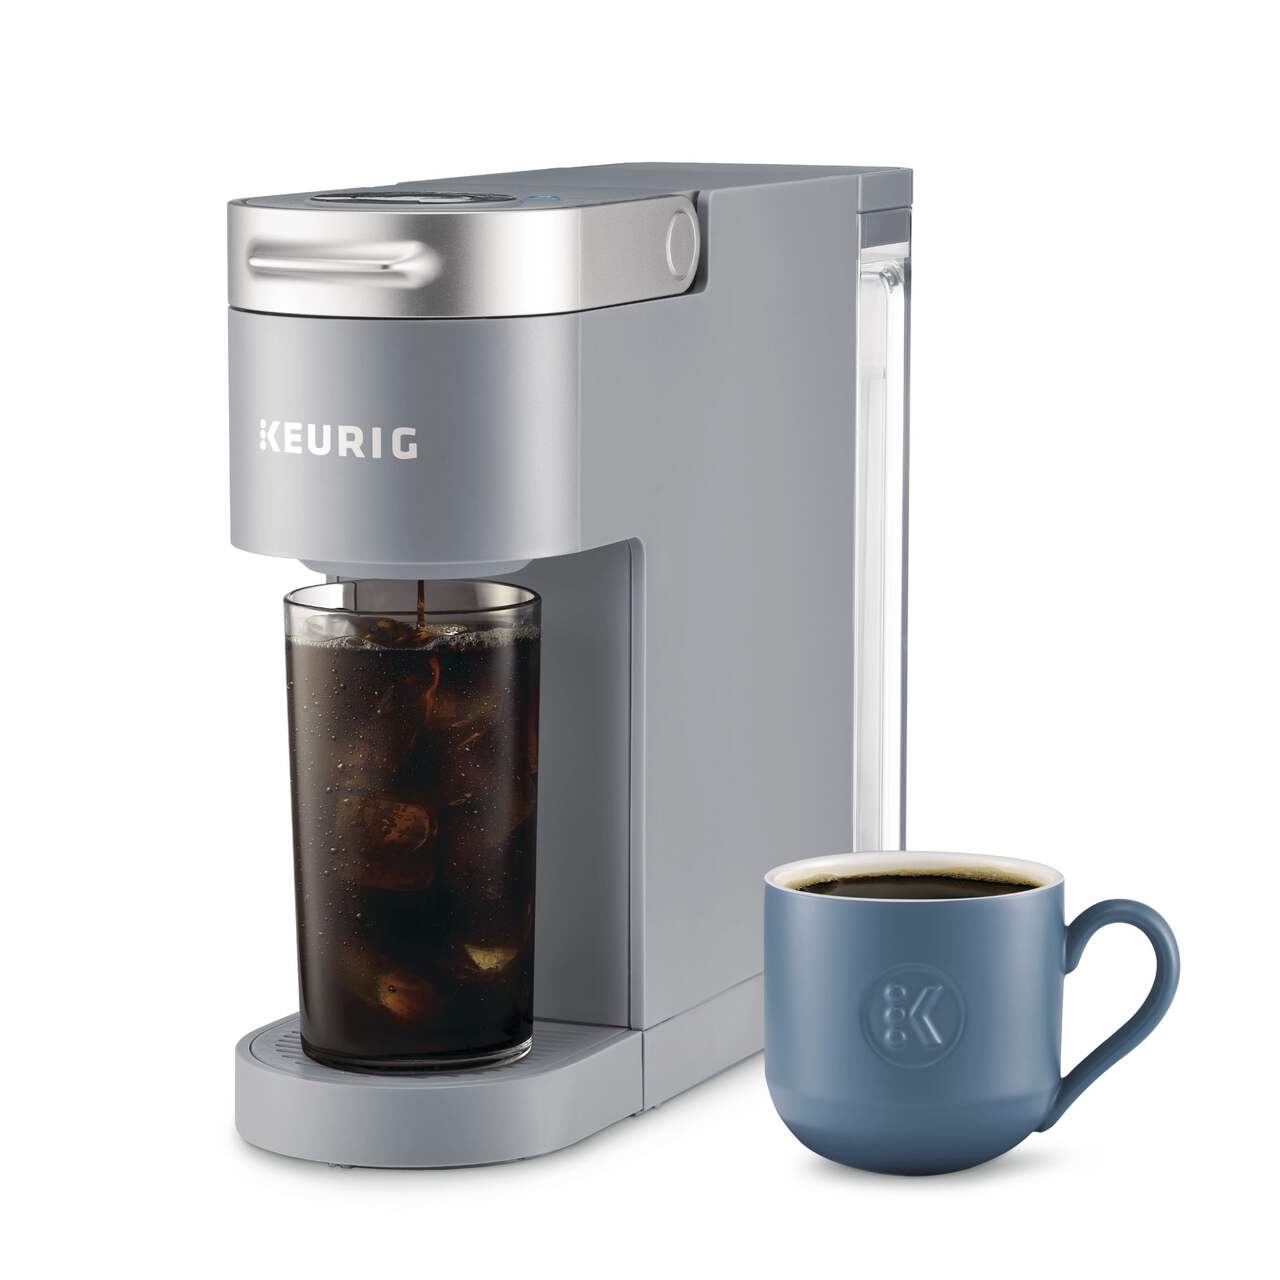 Keurig K-Iced Essentials Gray Iced and Hot Single-Serve K-Cup Pod